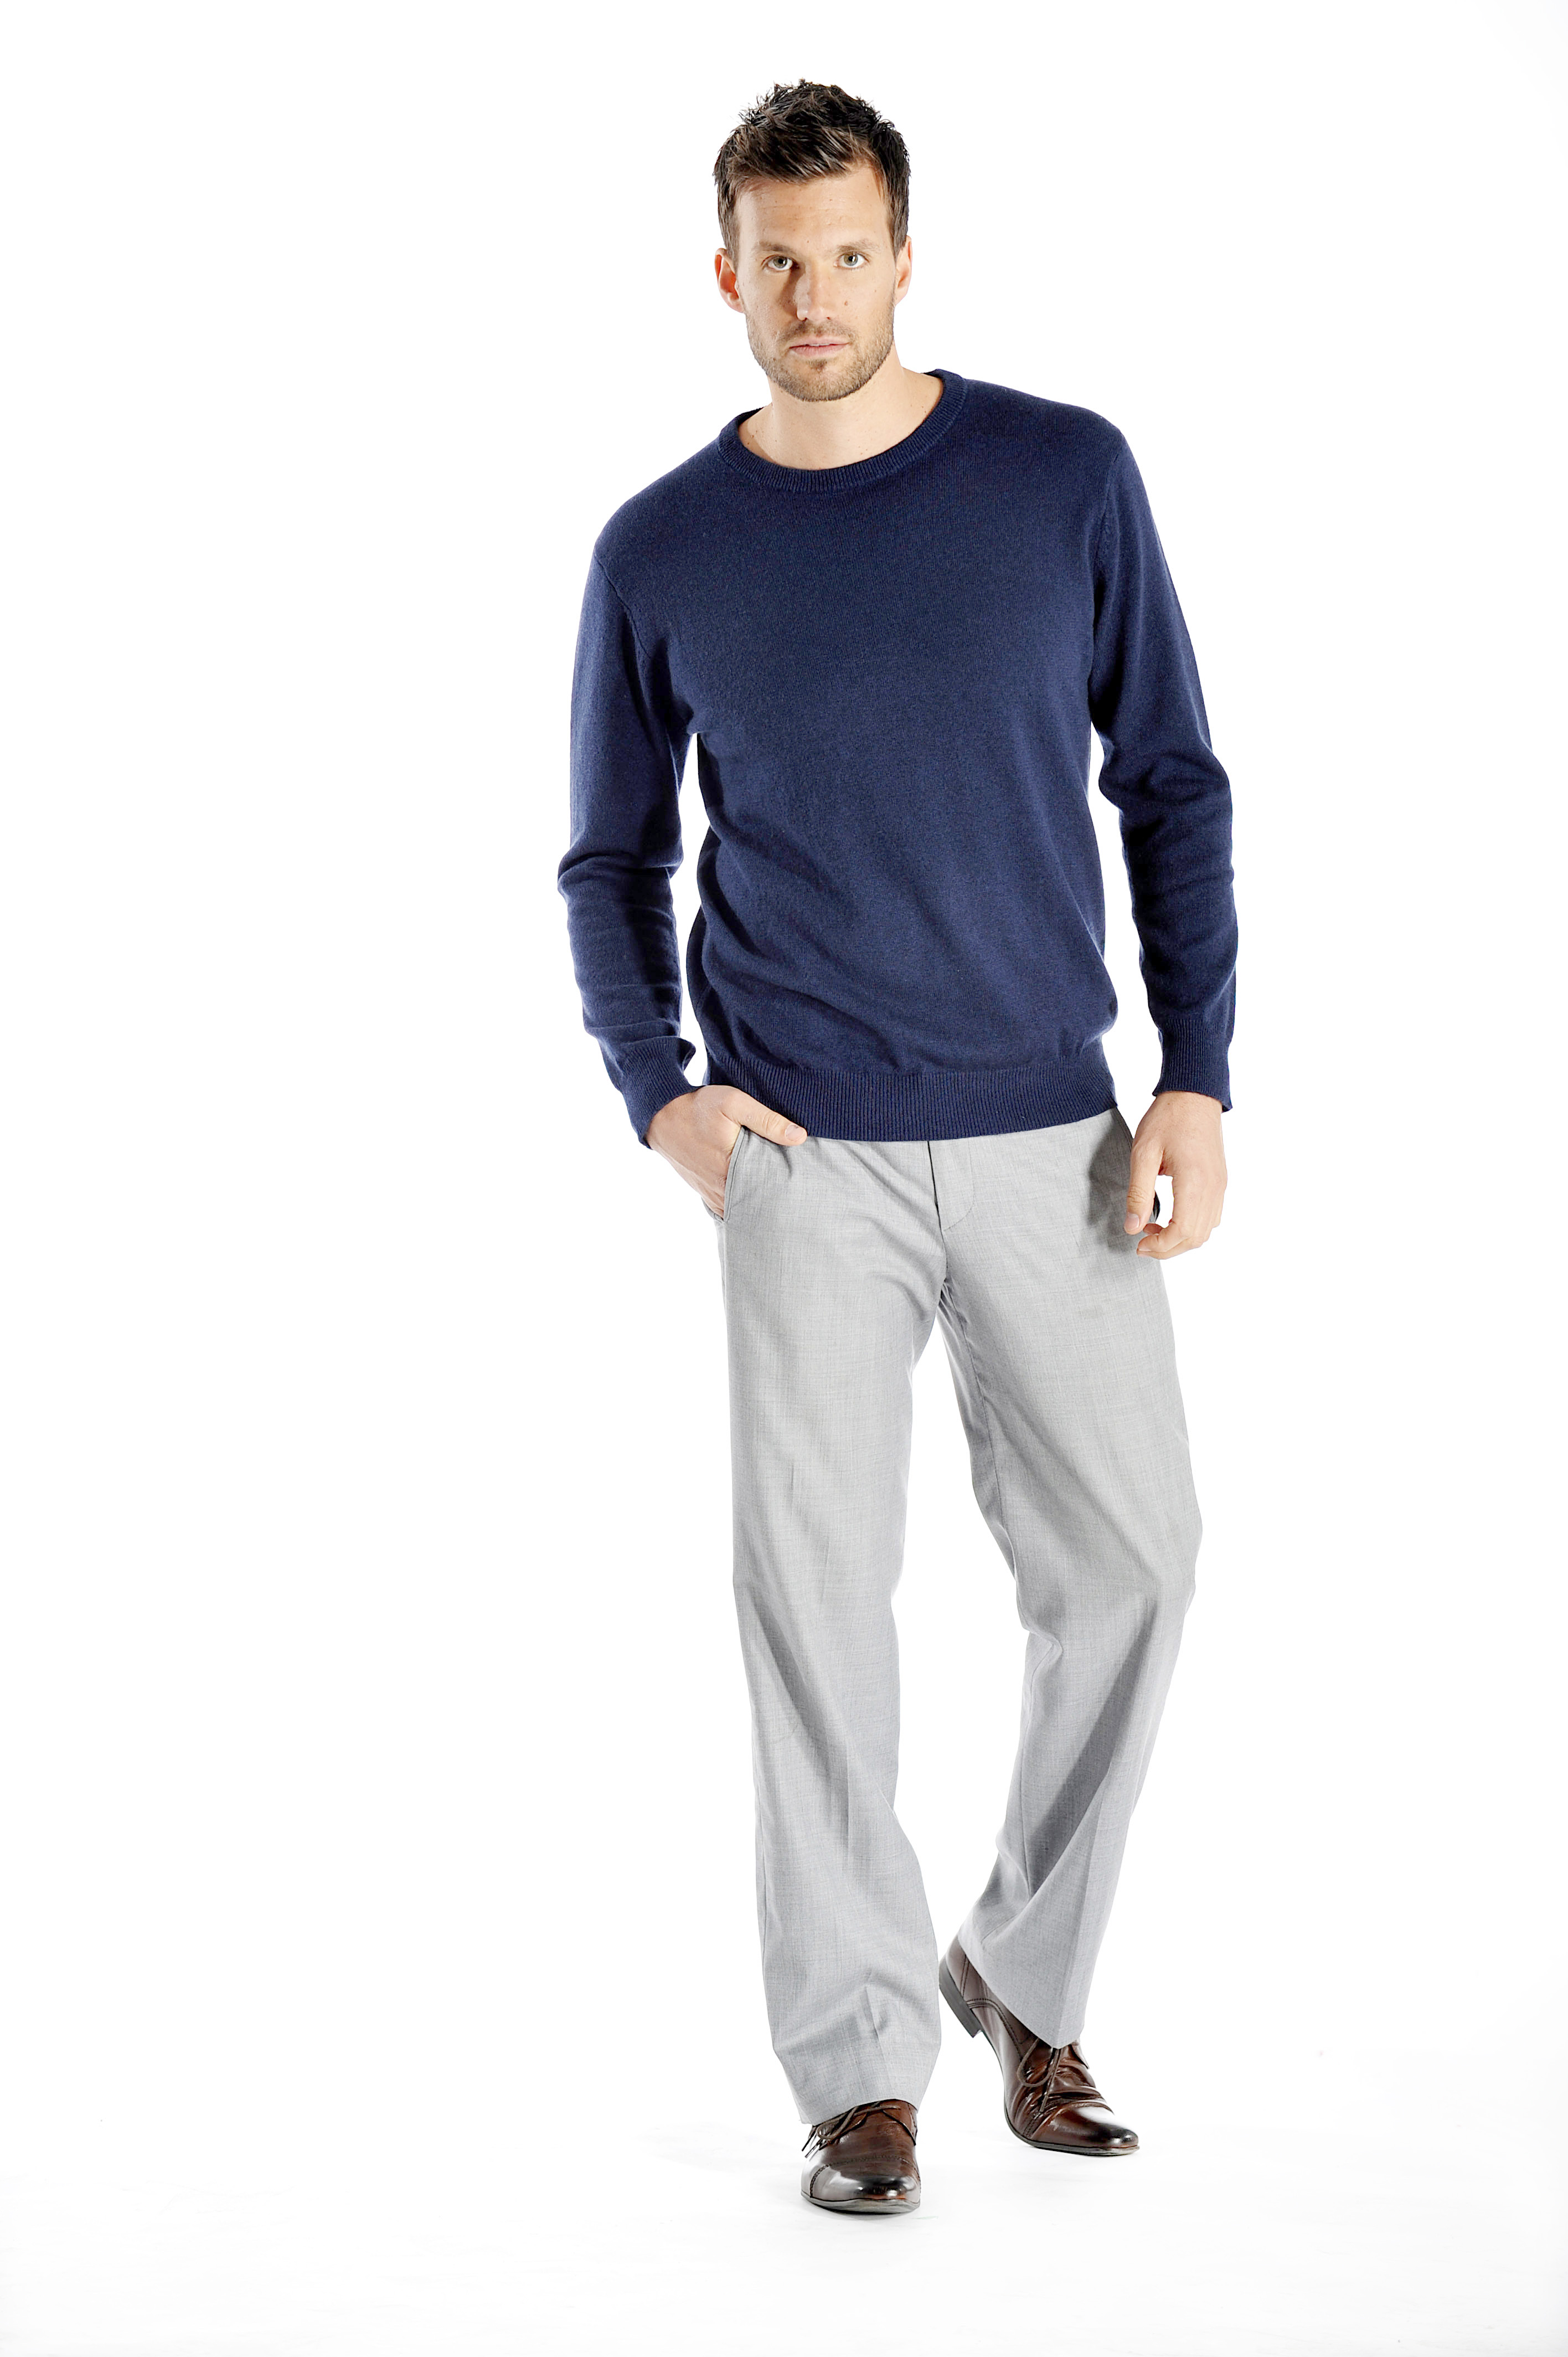 Men\'s Crew Neck Cashmere Sweater (Champagne, Large)